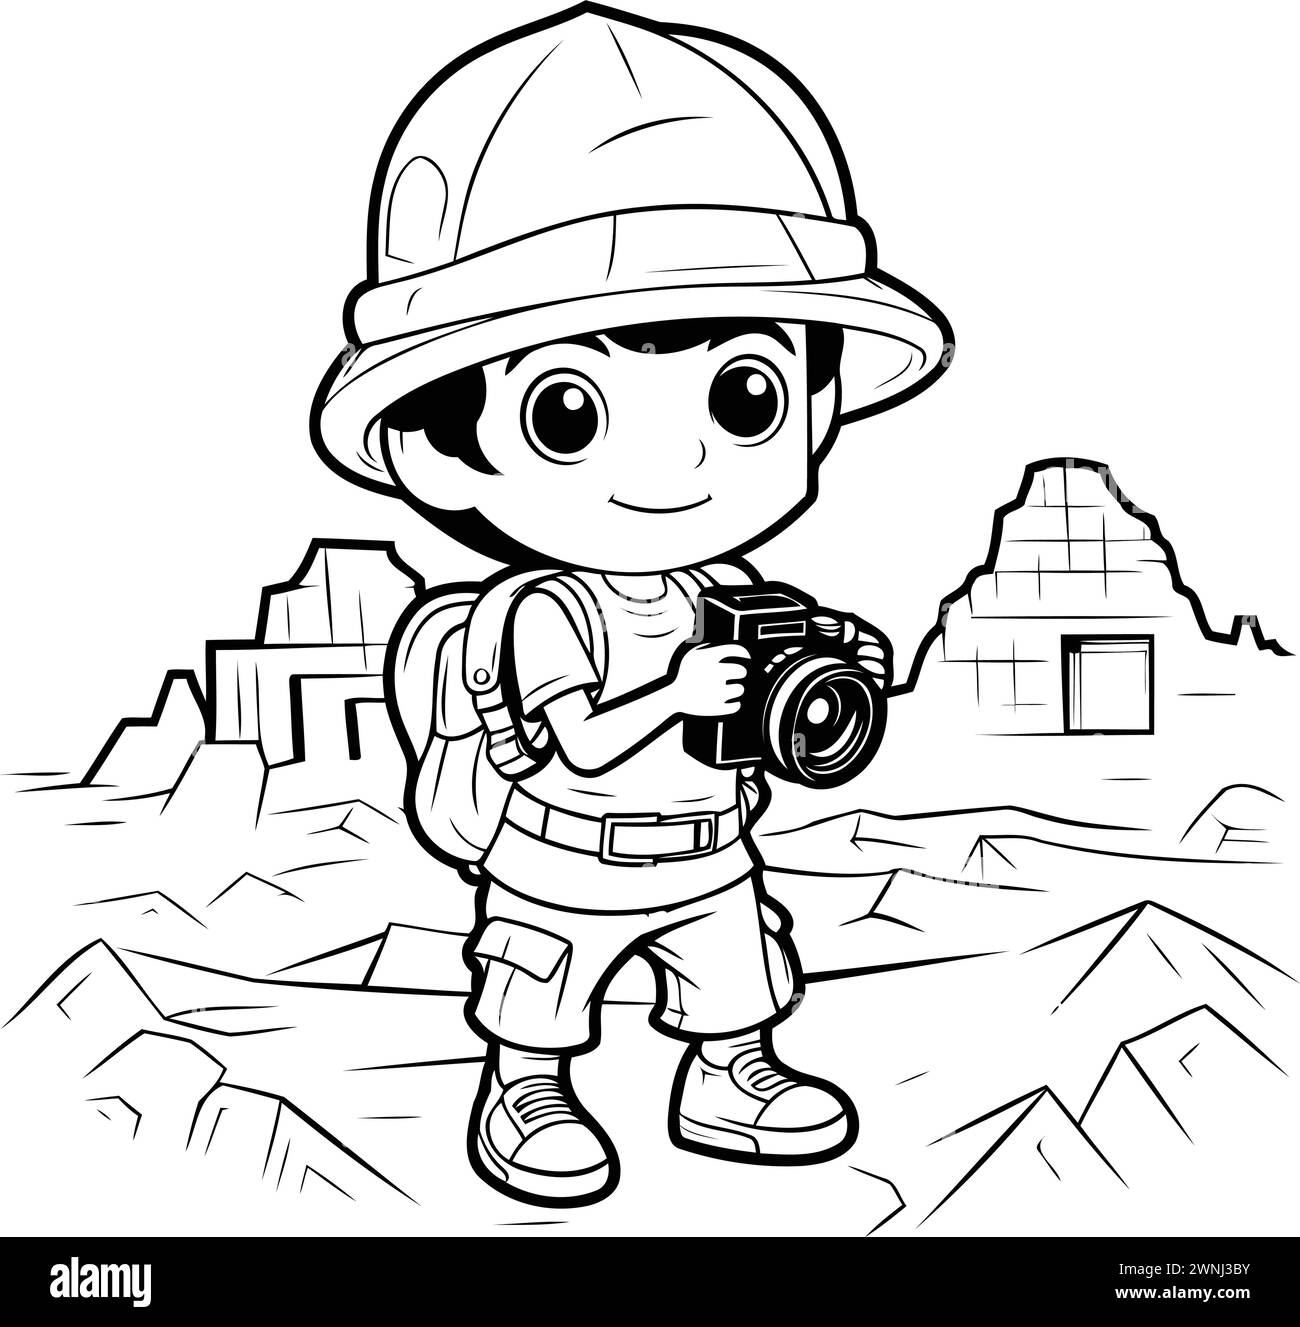 Illustration of a Kid Boy Wearing a Safety Helmet and Holding a Camera Stock Vector